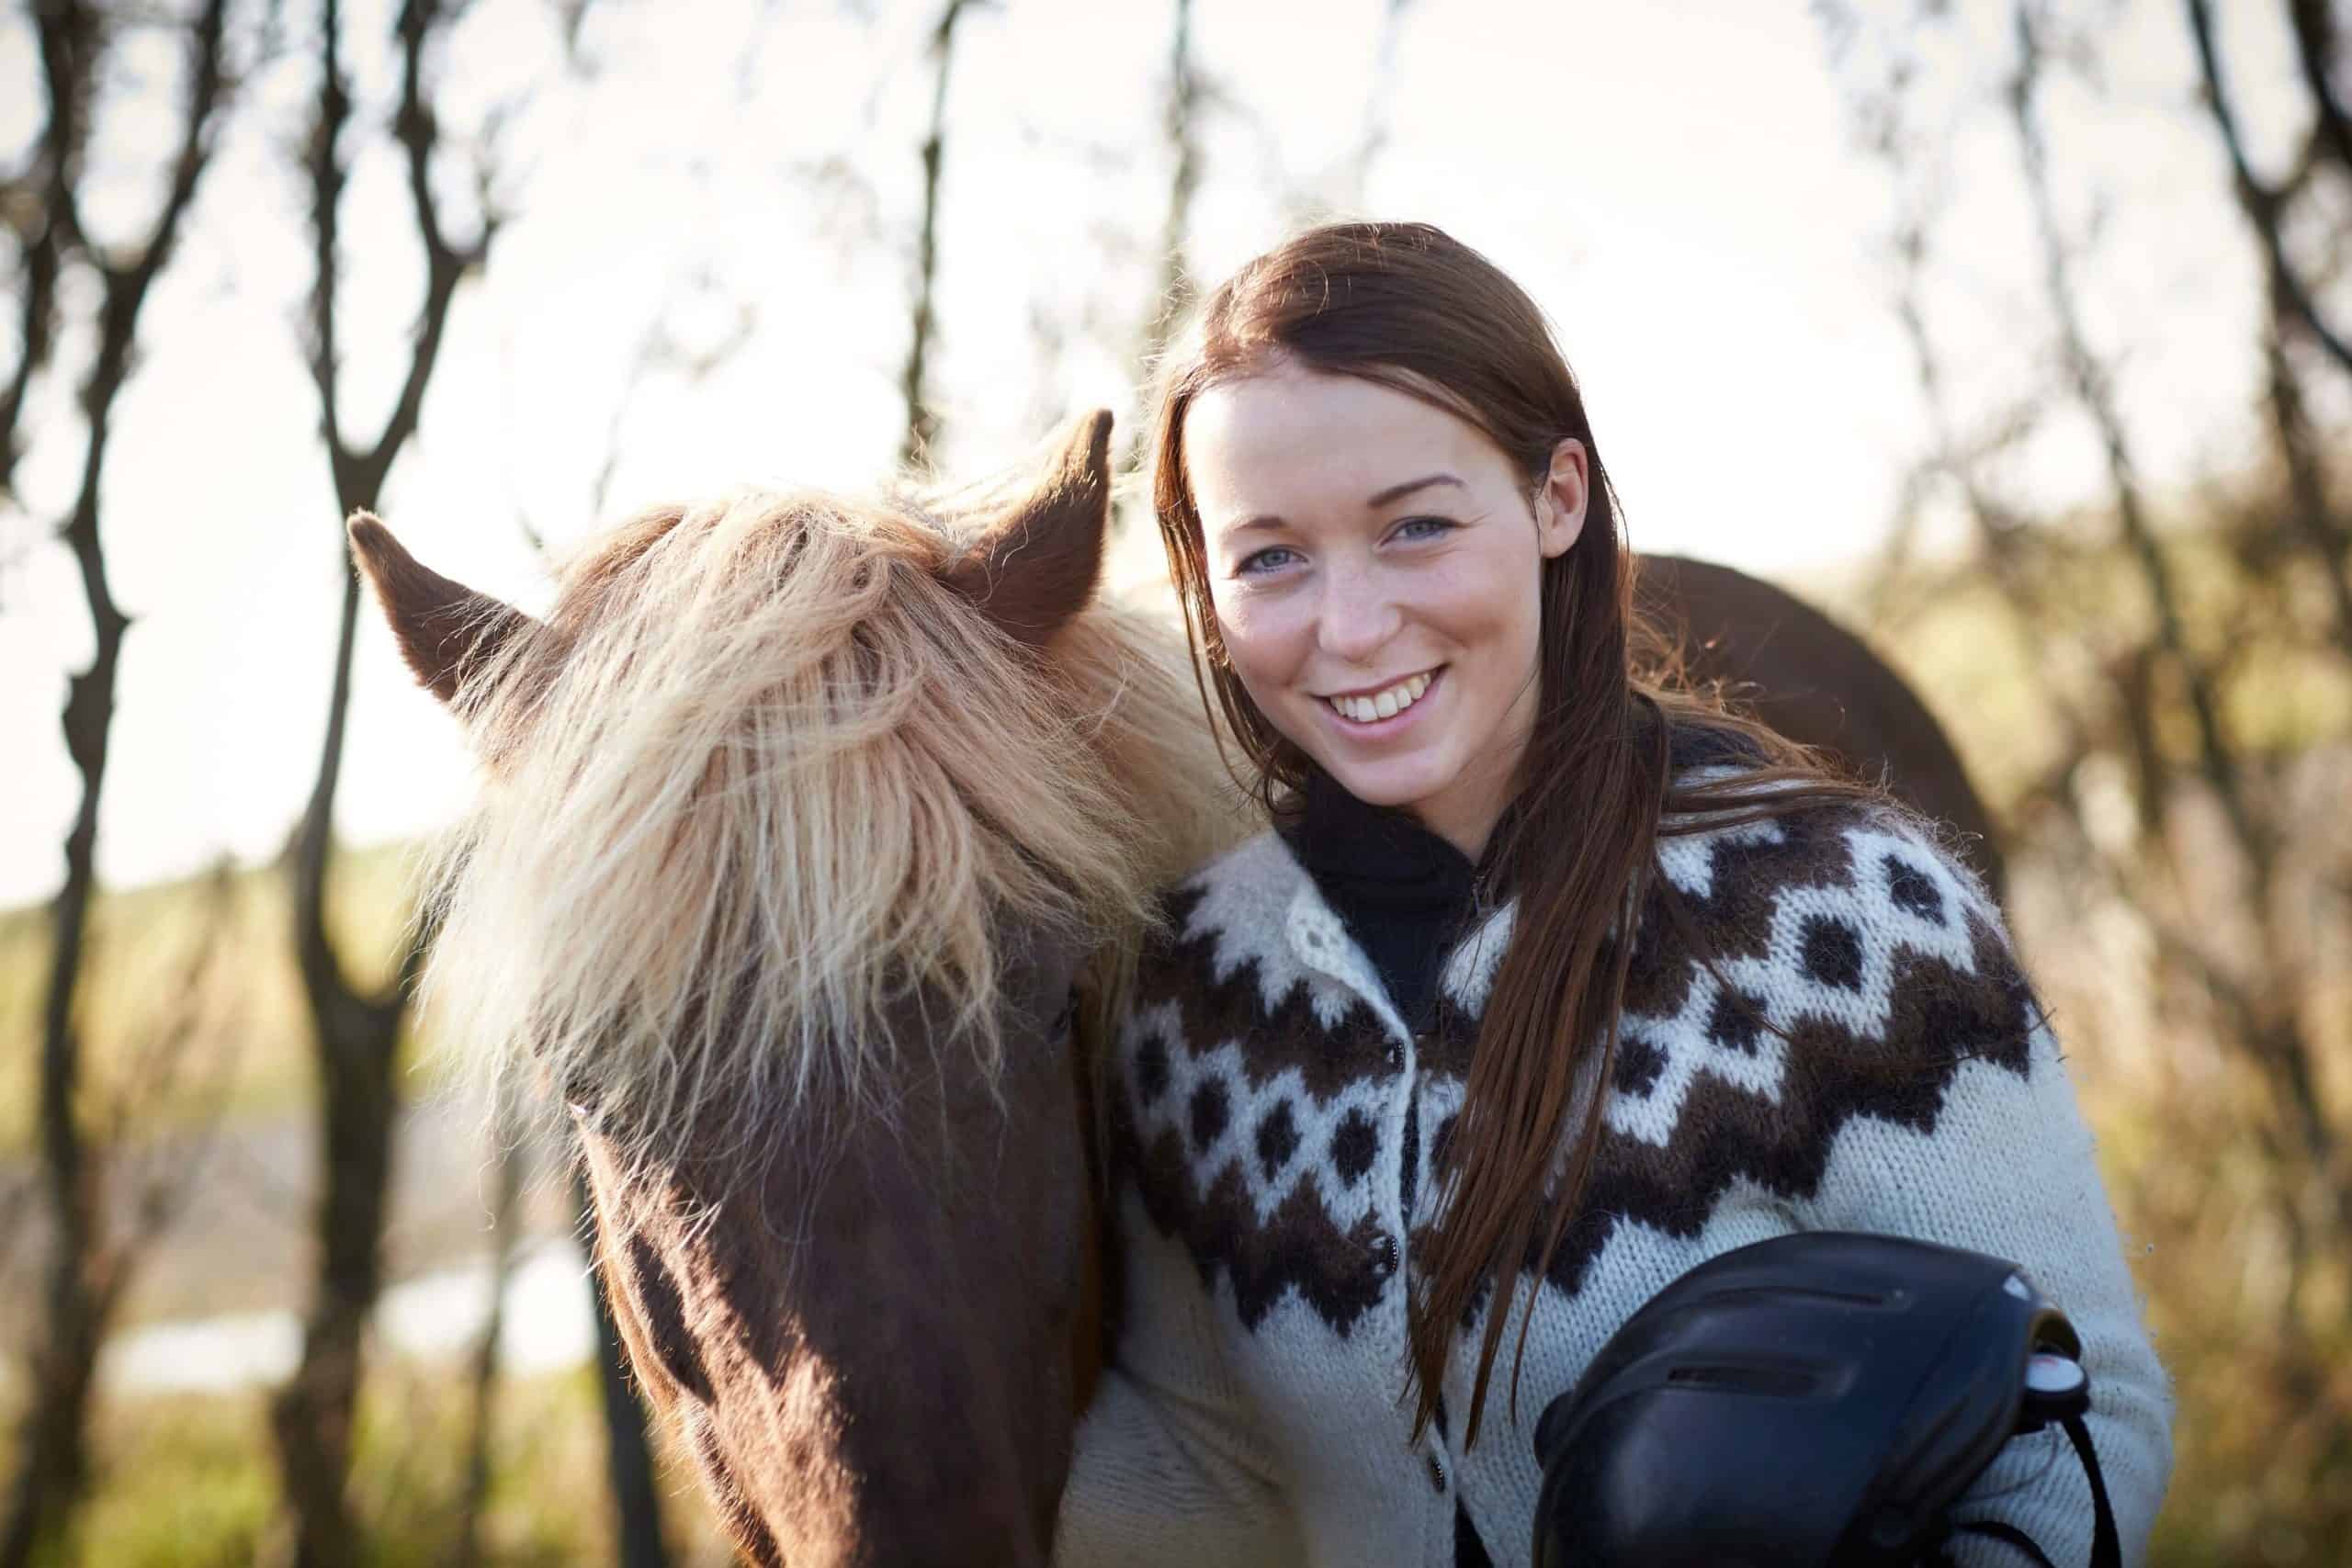 Icelandic woman wears lopapeysa and poses next to an Icelandic horse.